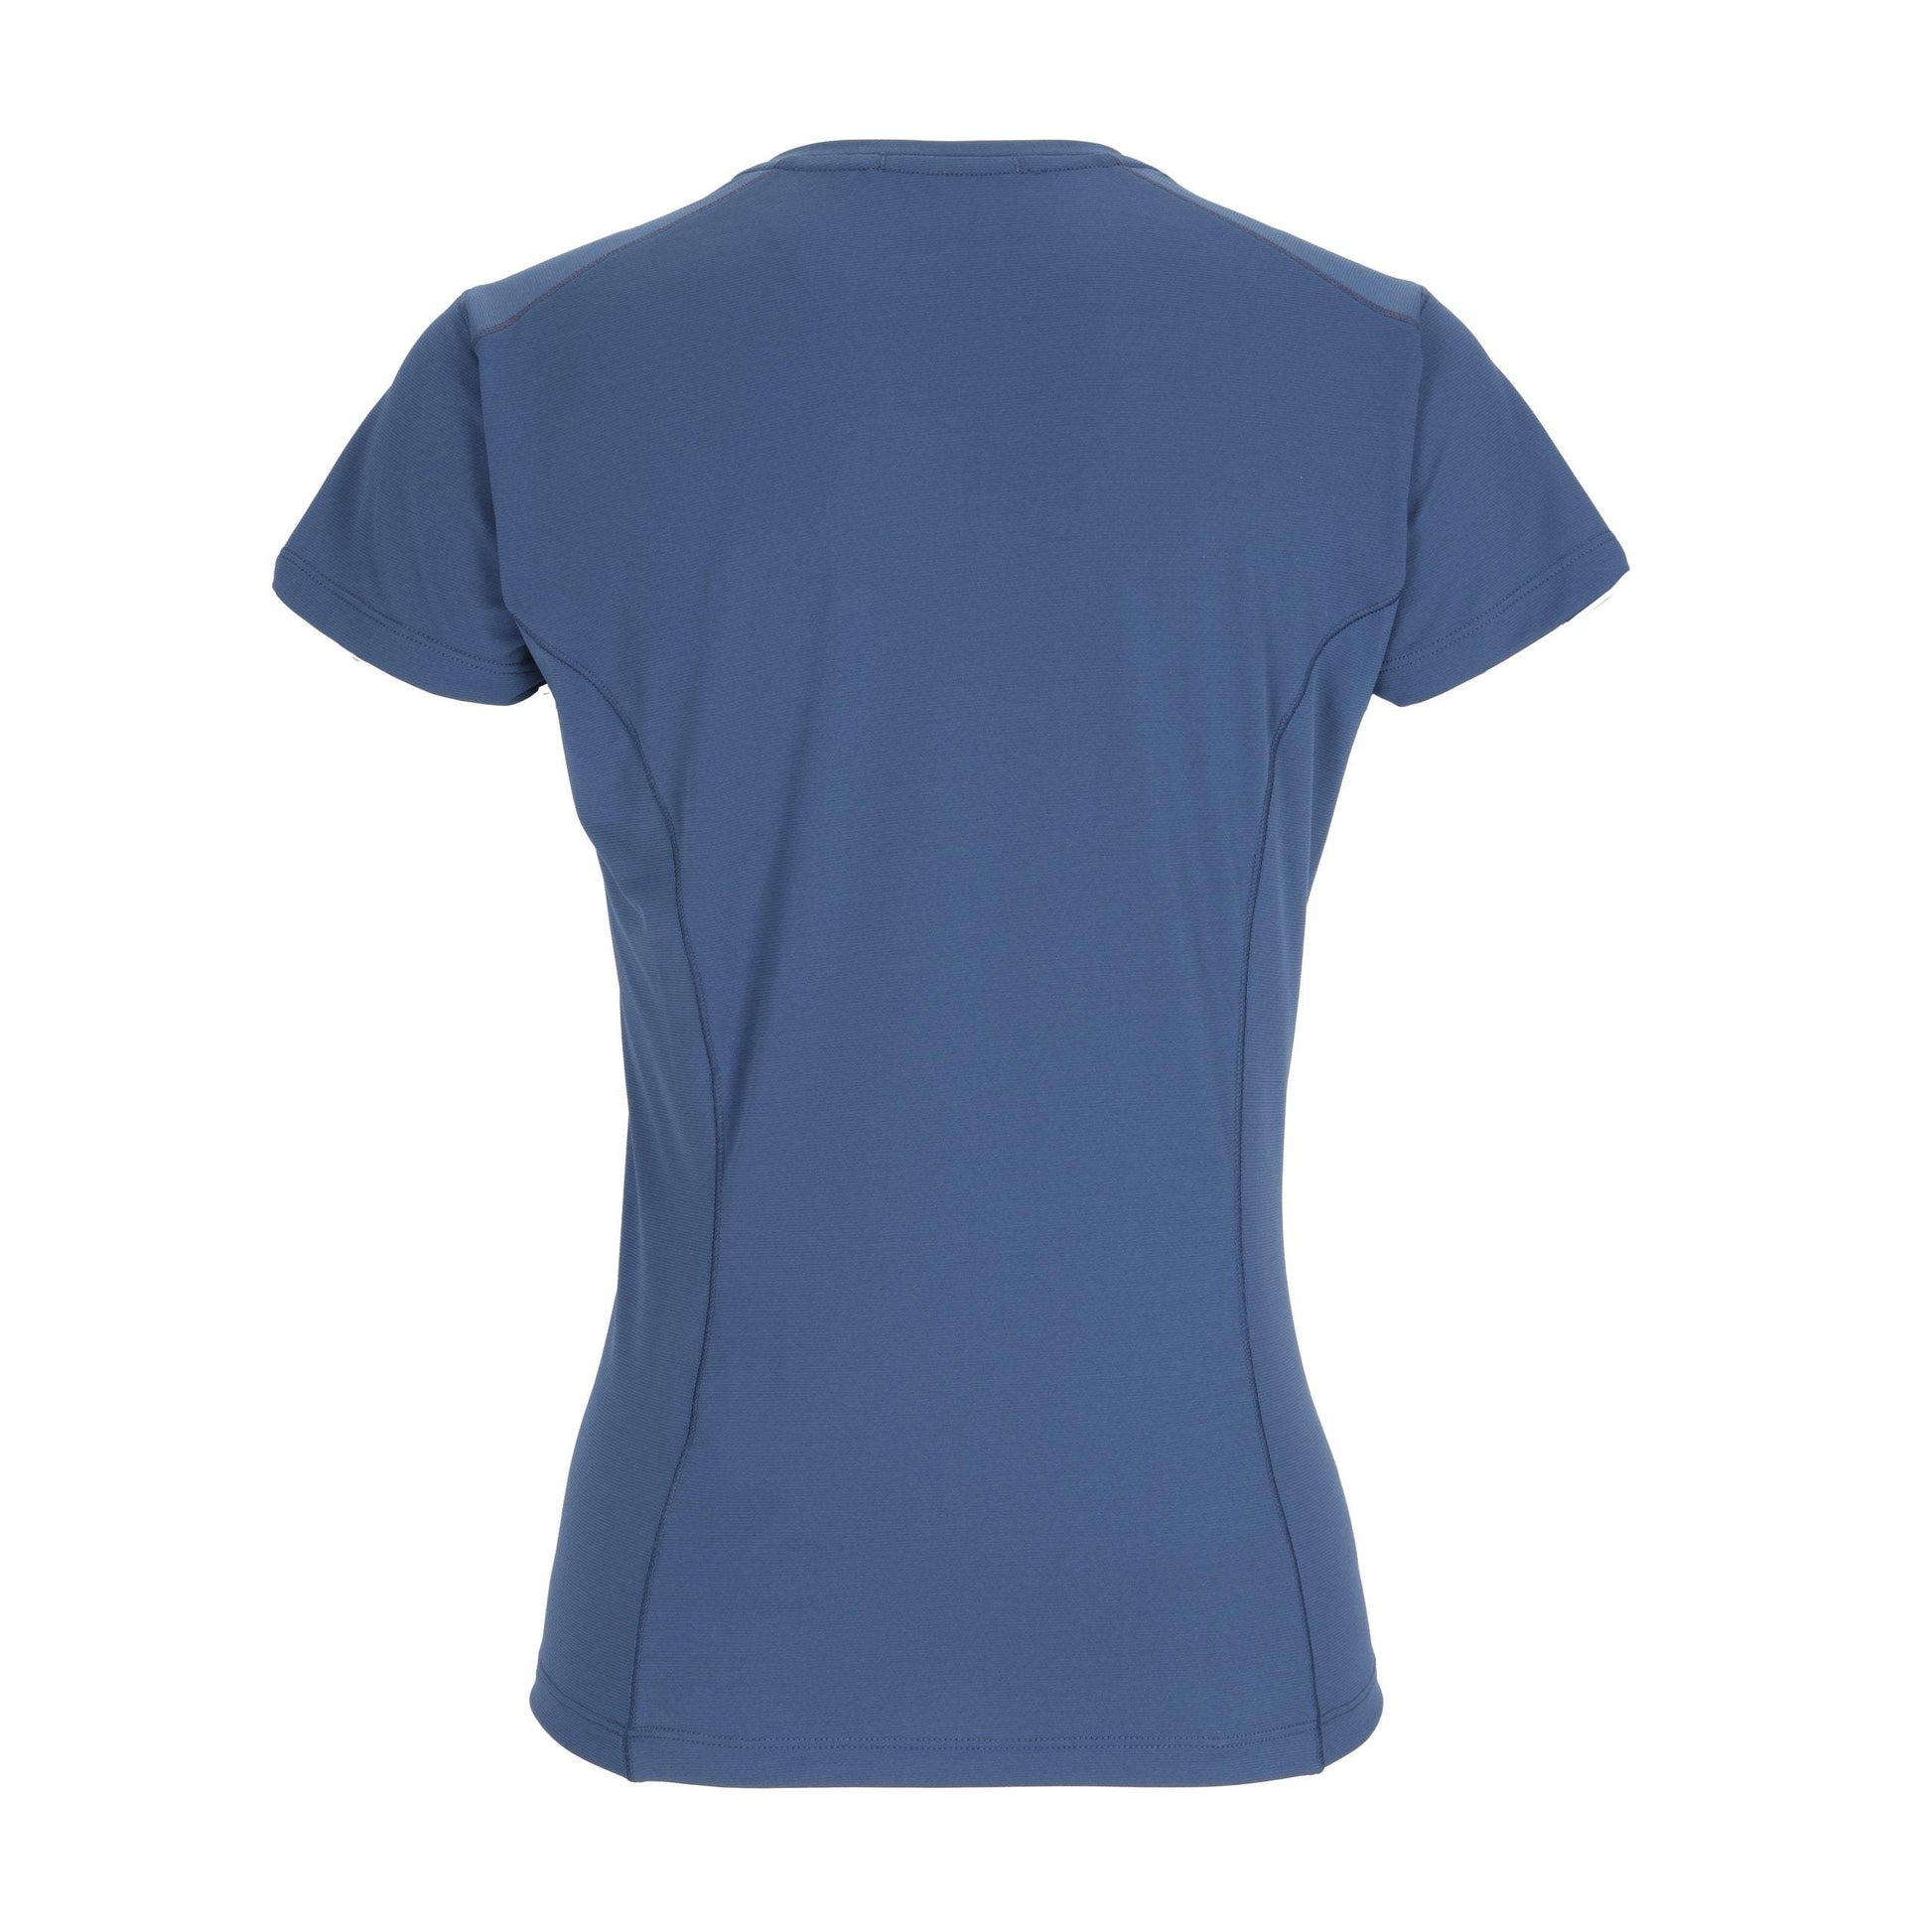 Women’s Force Tee by RAB - The Luxury Promotional Gifts Company Limited